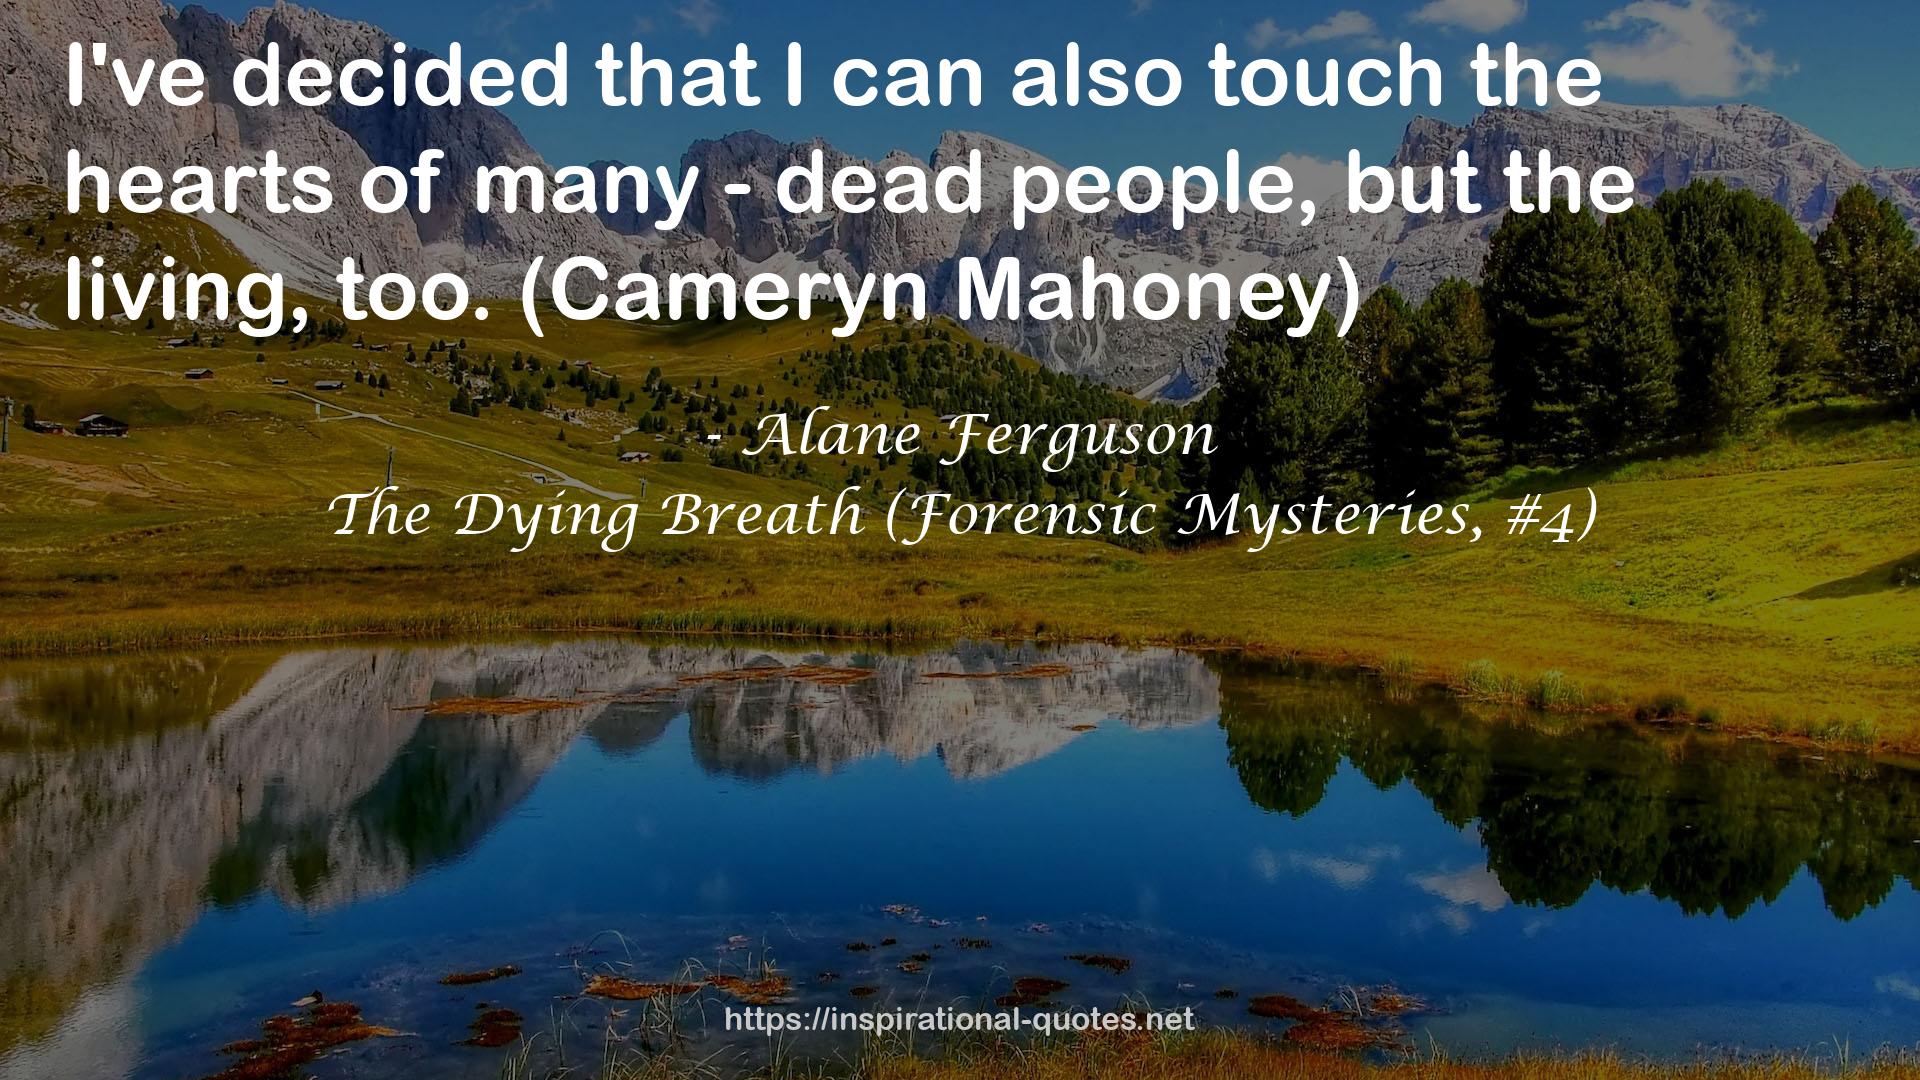 The Dying Breath (Forensic Mysteries, #4) QUOTES